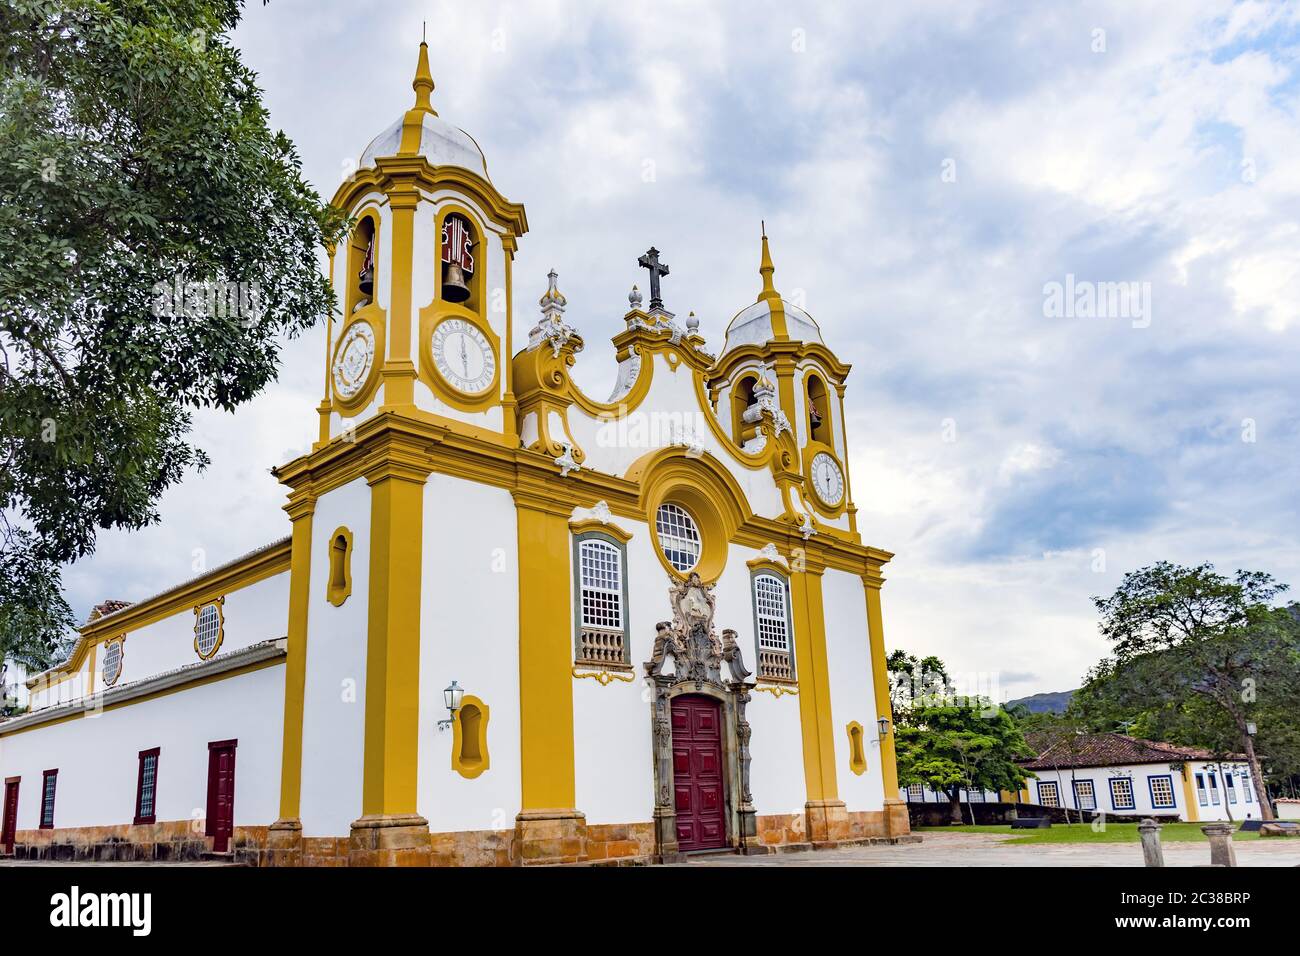 Front view of an old church built in the 18th century in baroque style Stock Photo